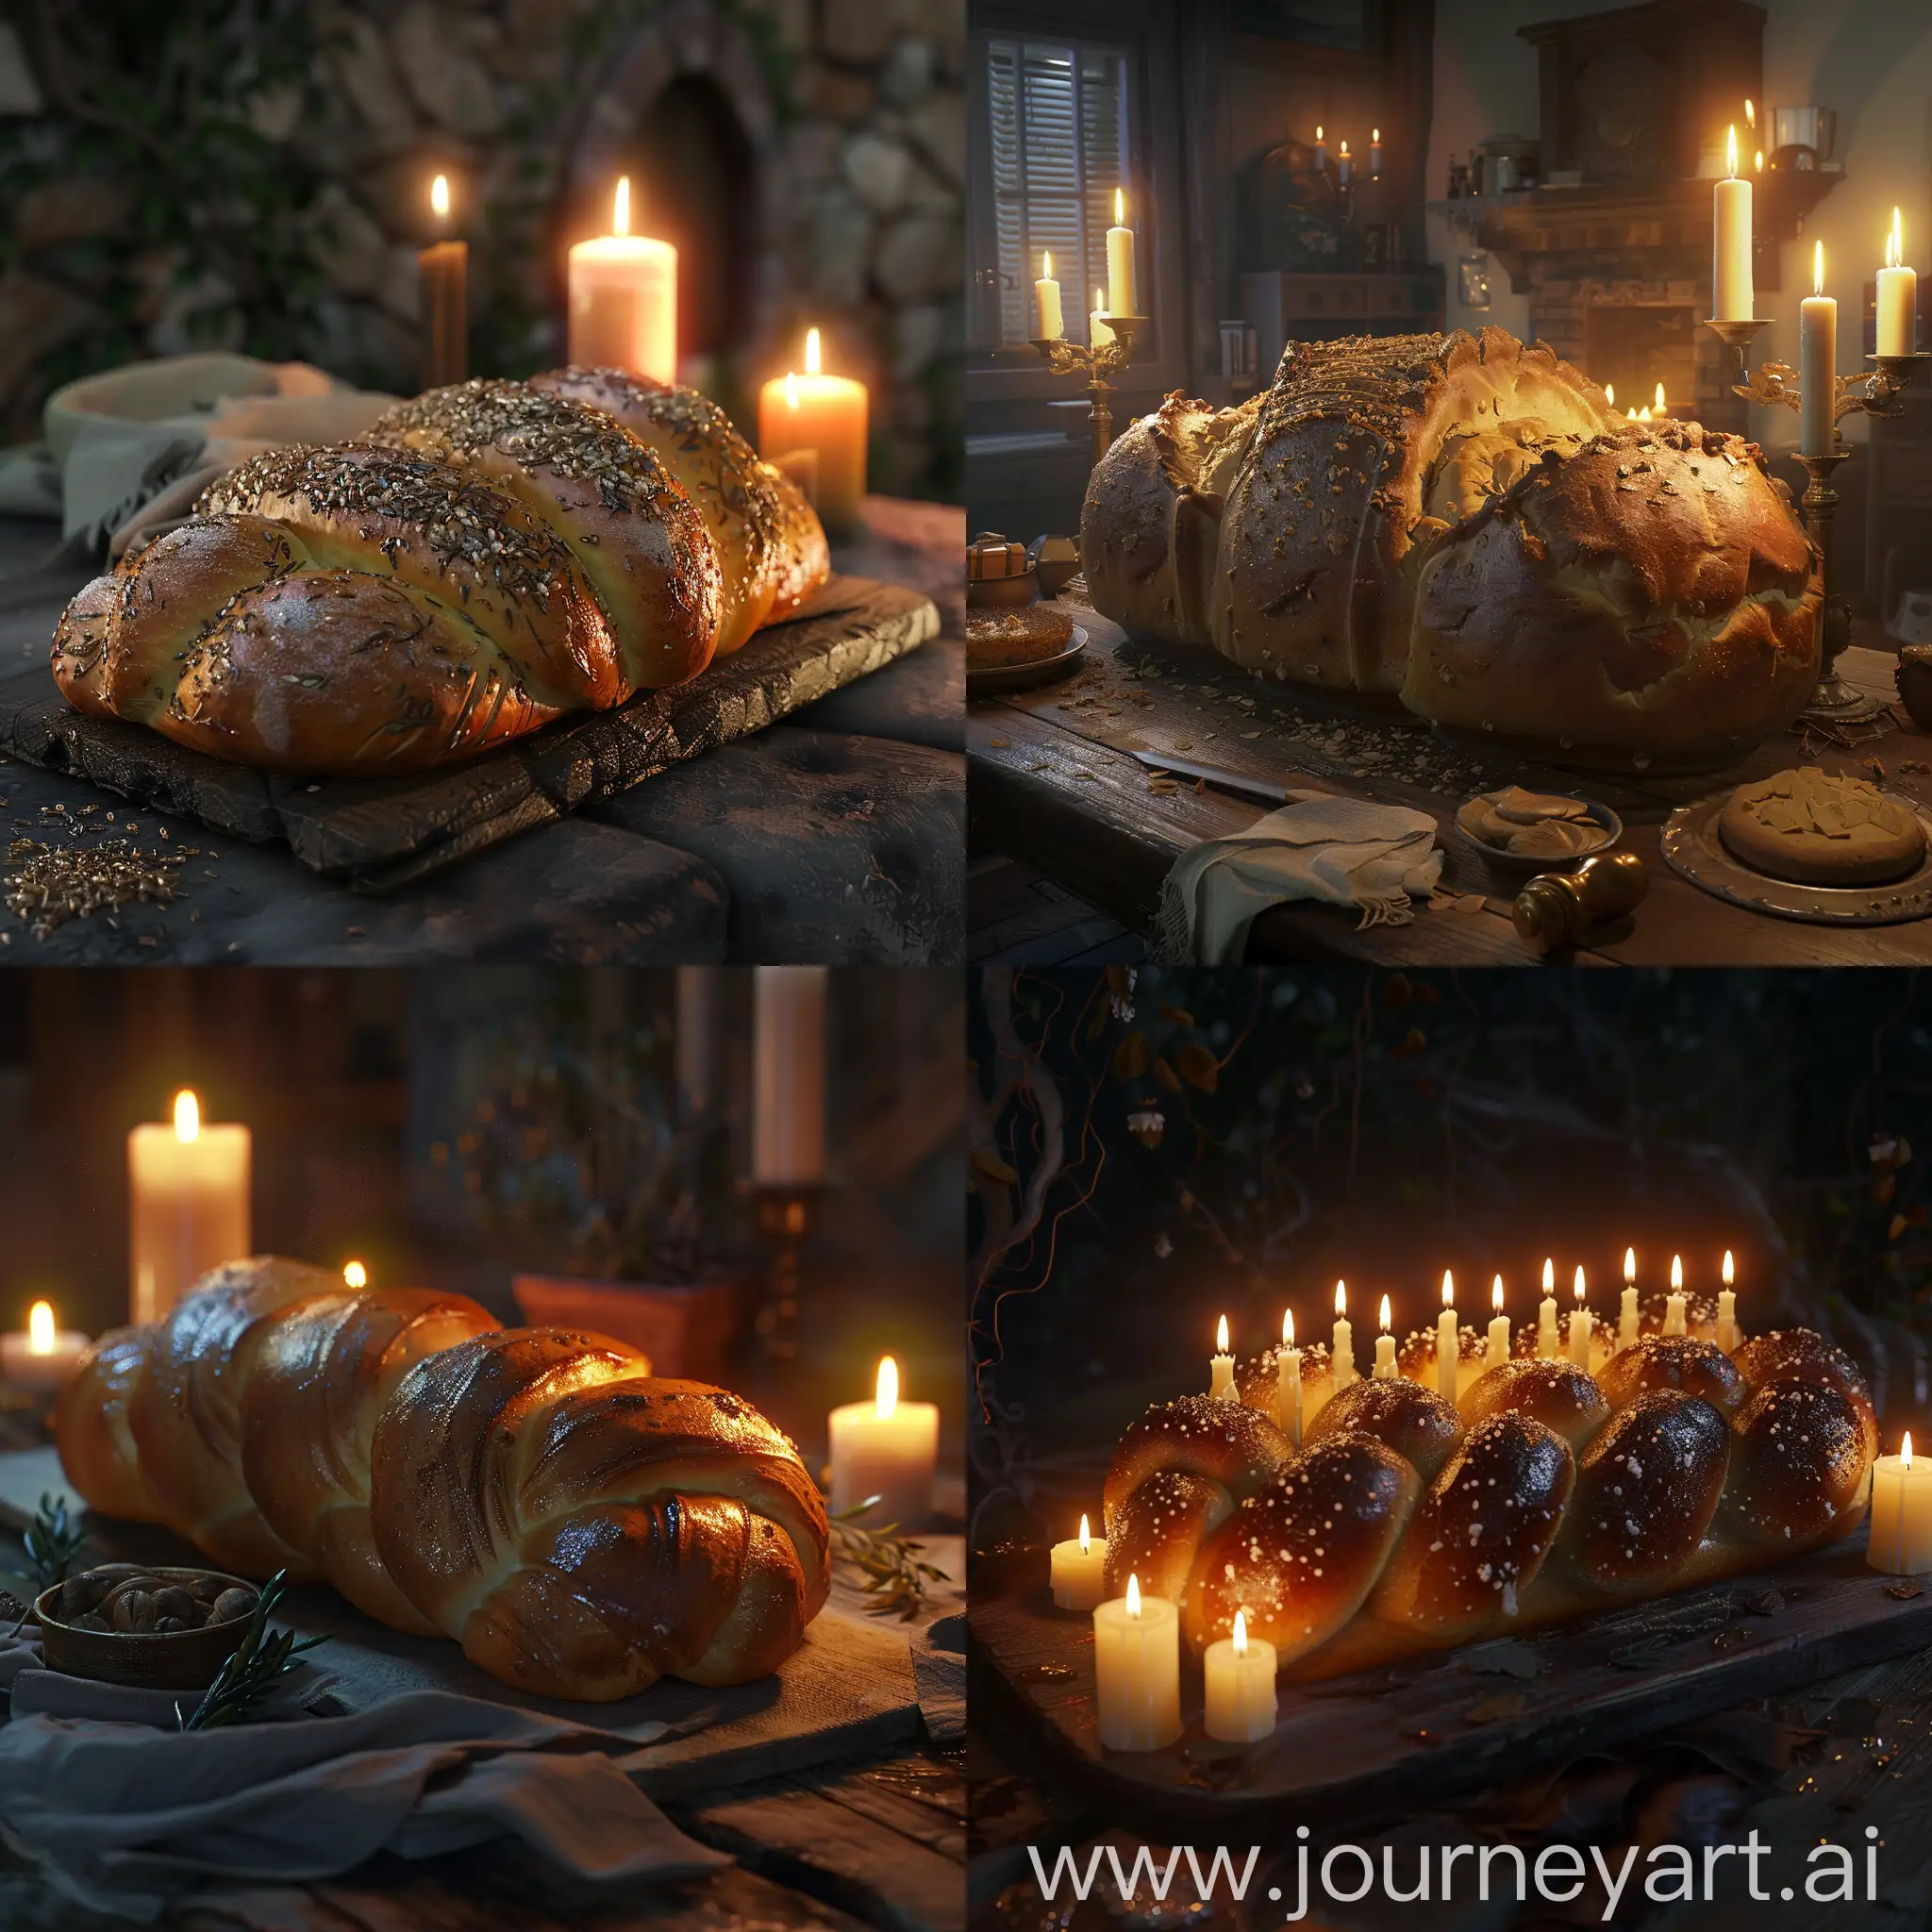 Celebratory-Big-Bread-with-Candles-3D-Animation